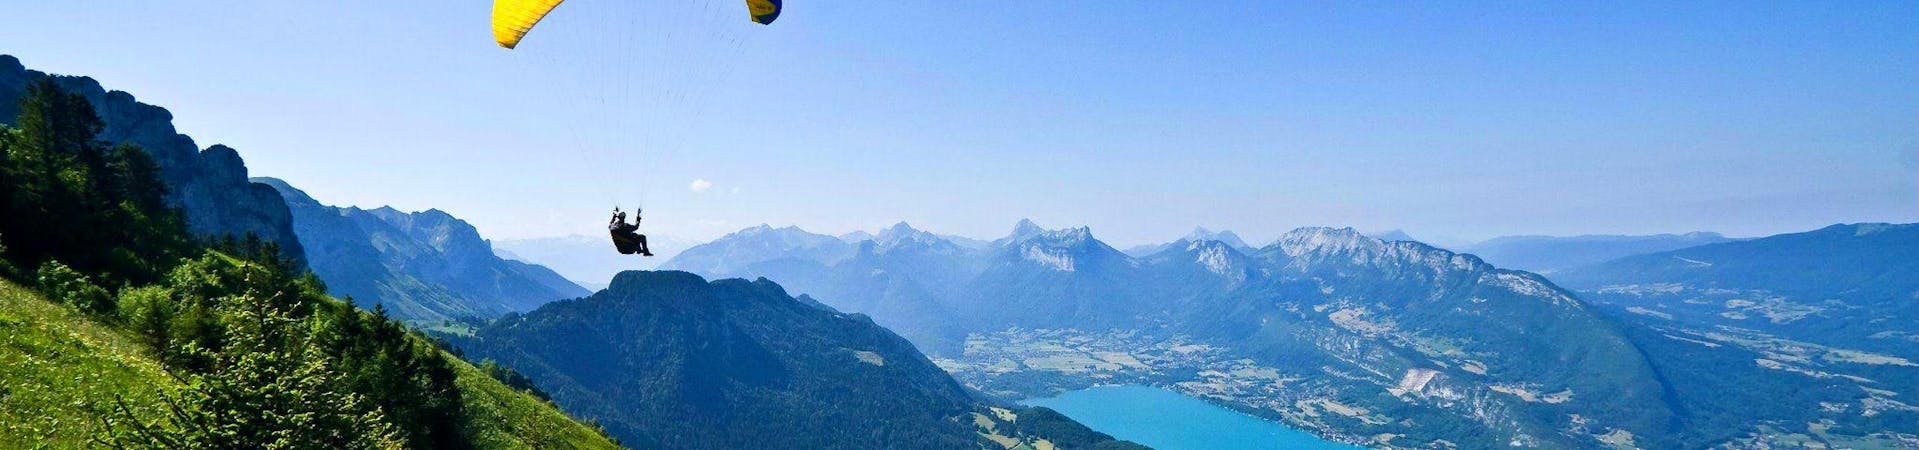 A person is enjoying his Tandem Paragliding in Lake Annecy - Discovery activity with Flyeo.